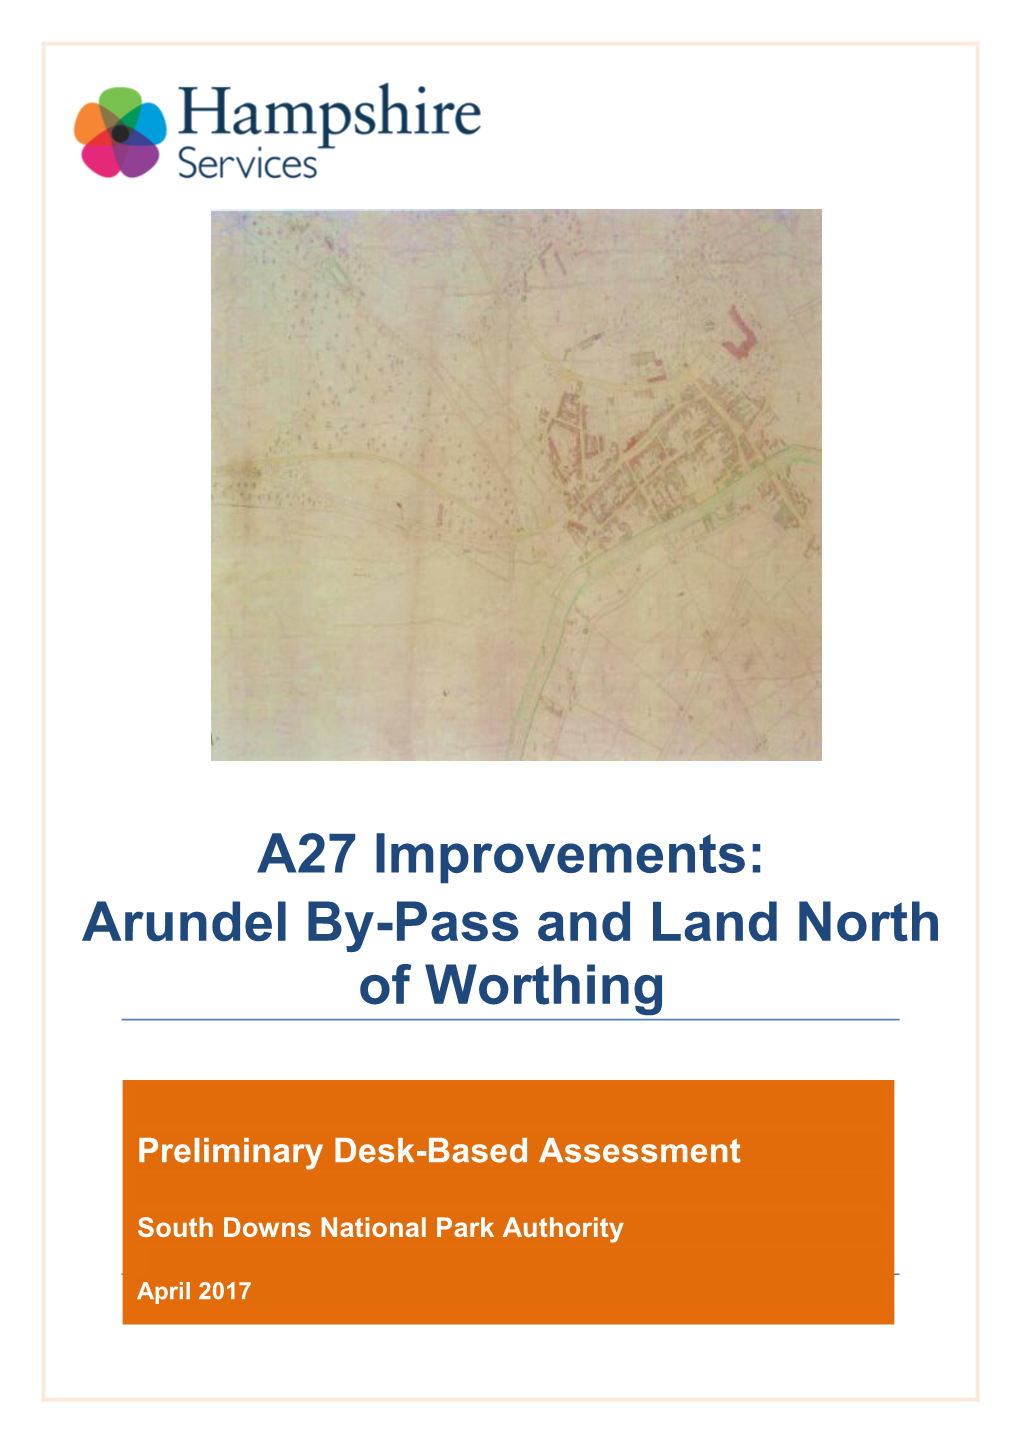 A27 Improvements: Arundel By-Pass and Land North of Worthing